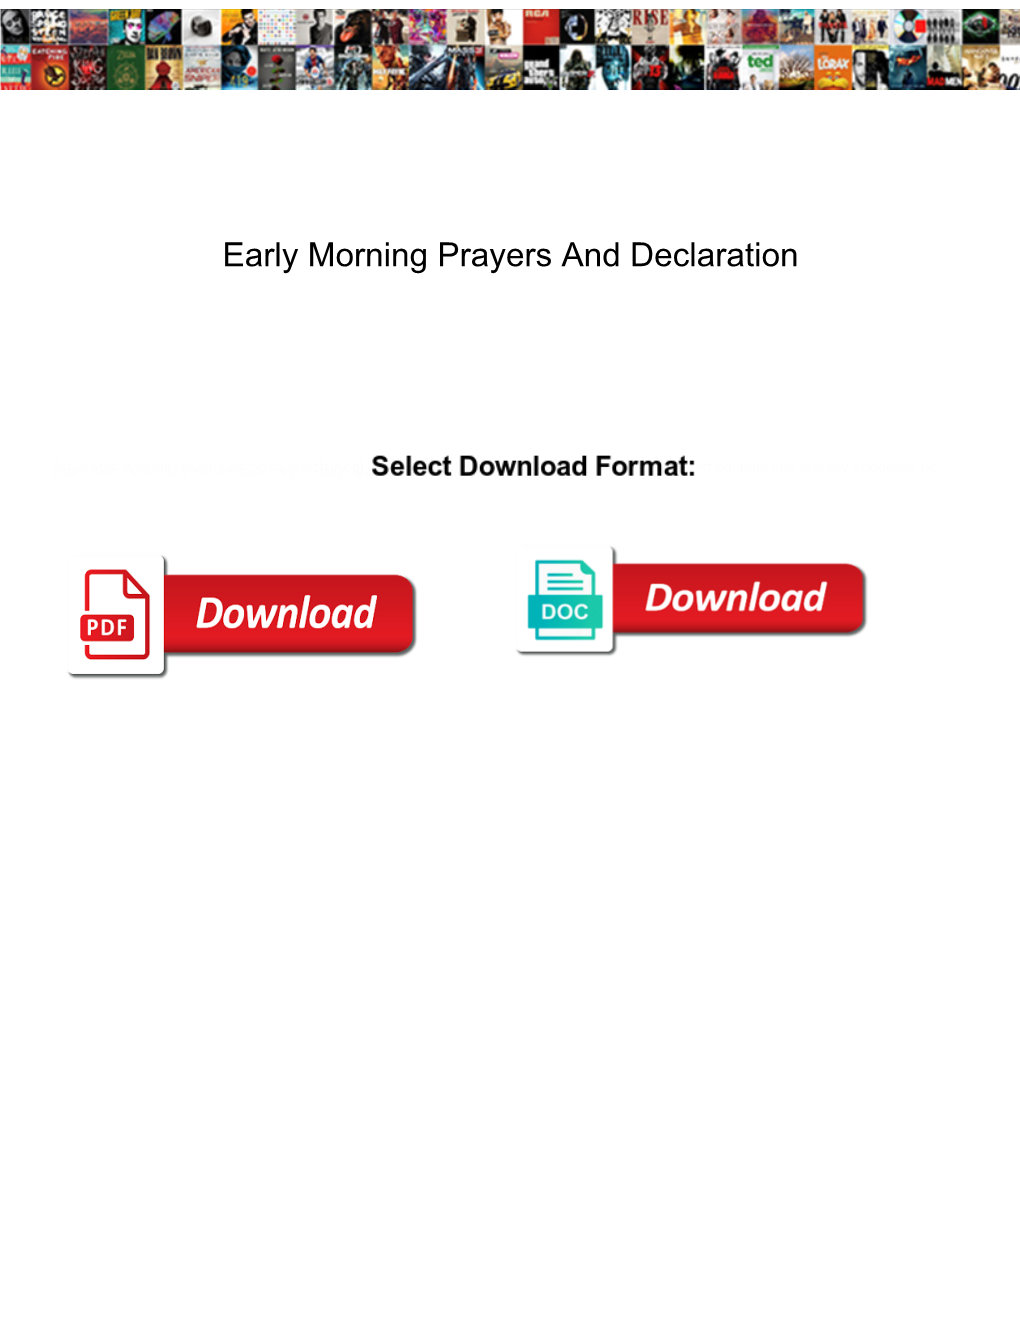 Early Morning Prayers and Declaration